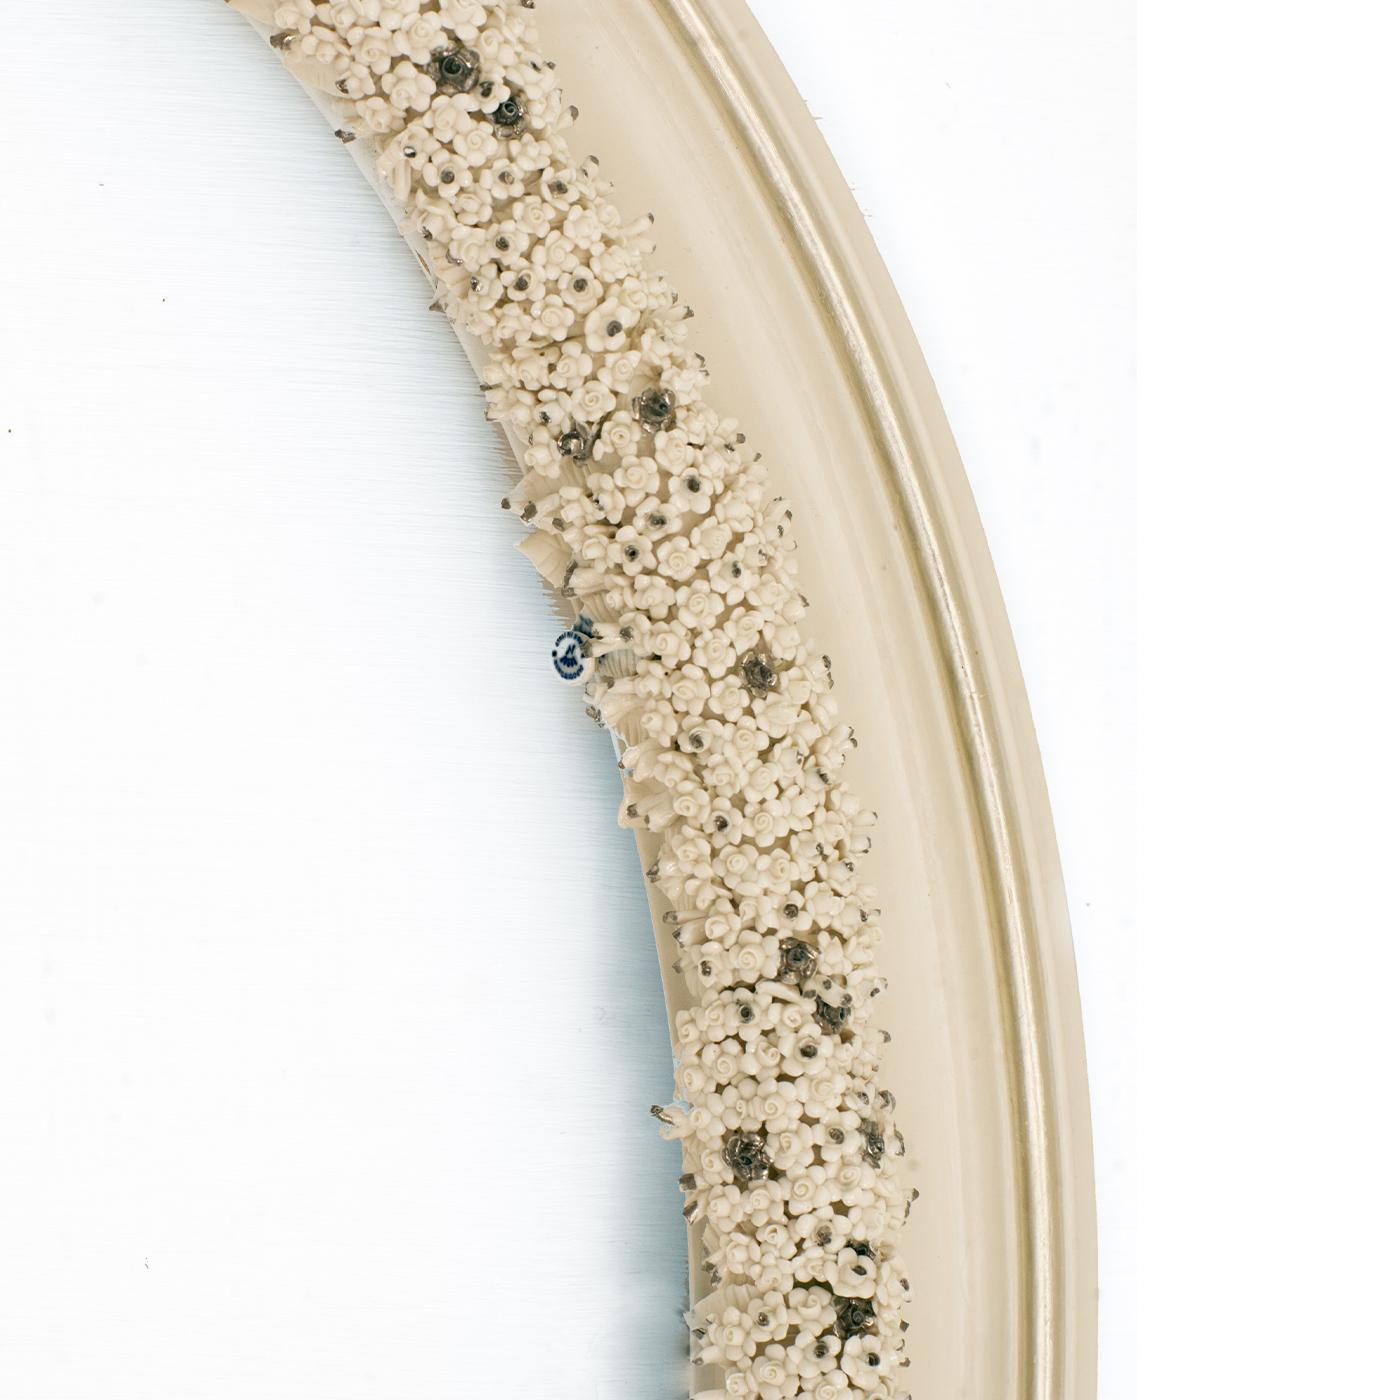 This stupendous oval wall mirror is a unique, exclusive design of unprecedented charm that will add refinement and sophistication to any style decor. Crafted of MDF lacquered in an ivory shade, it is finished with silver leaf details and elegant